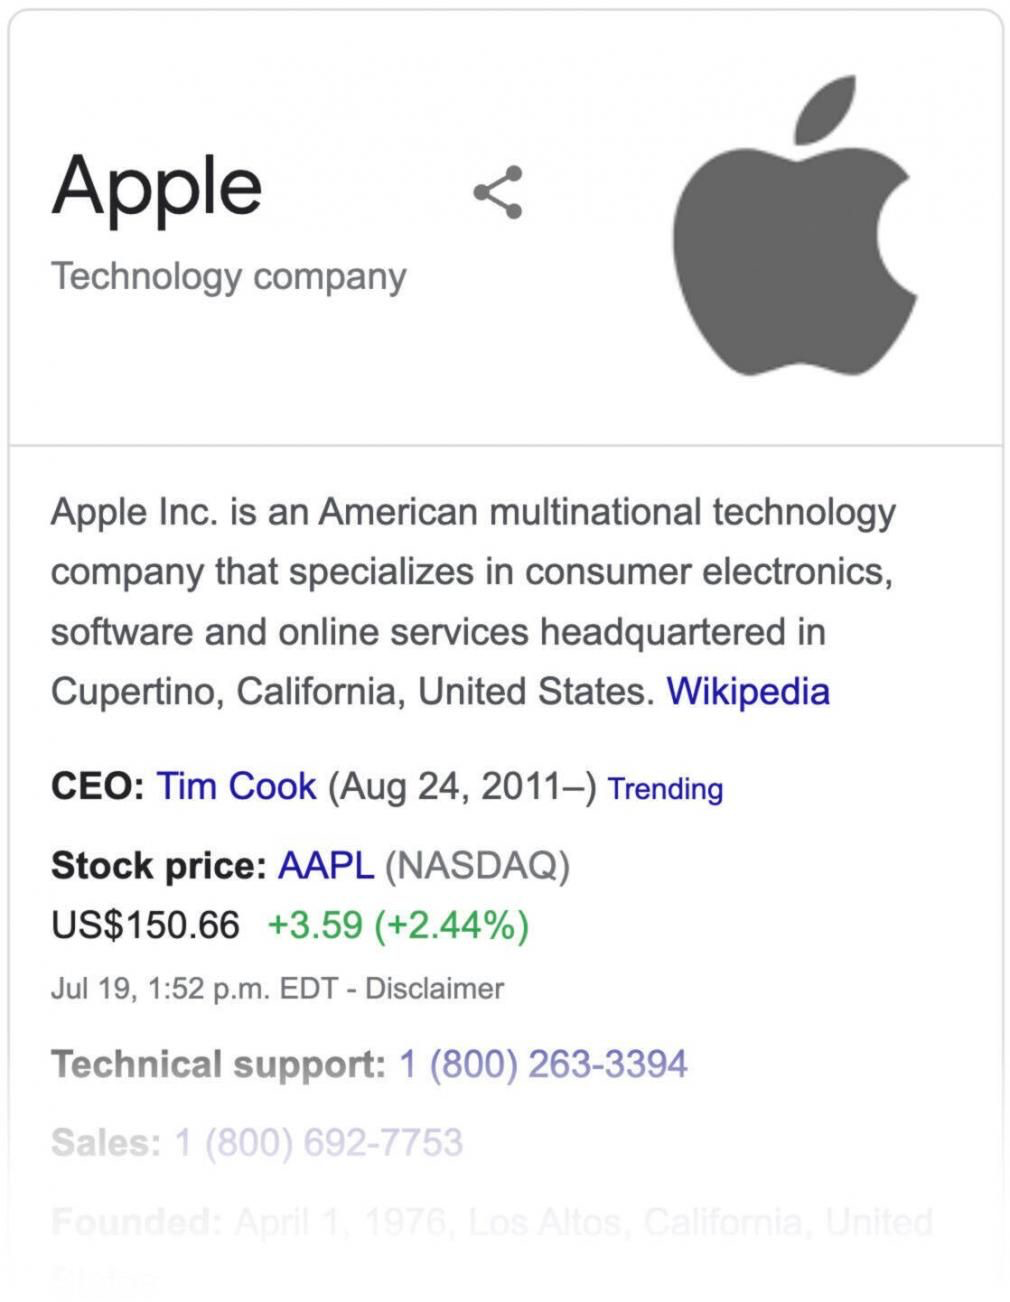 Apple's sheet  connected  the Google's SERP